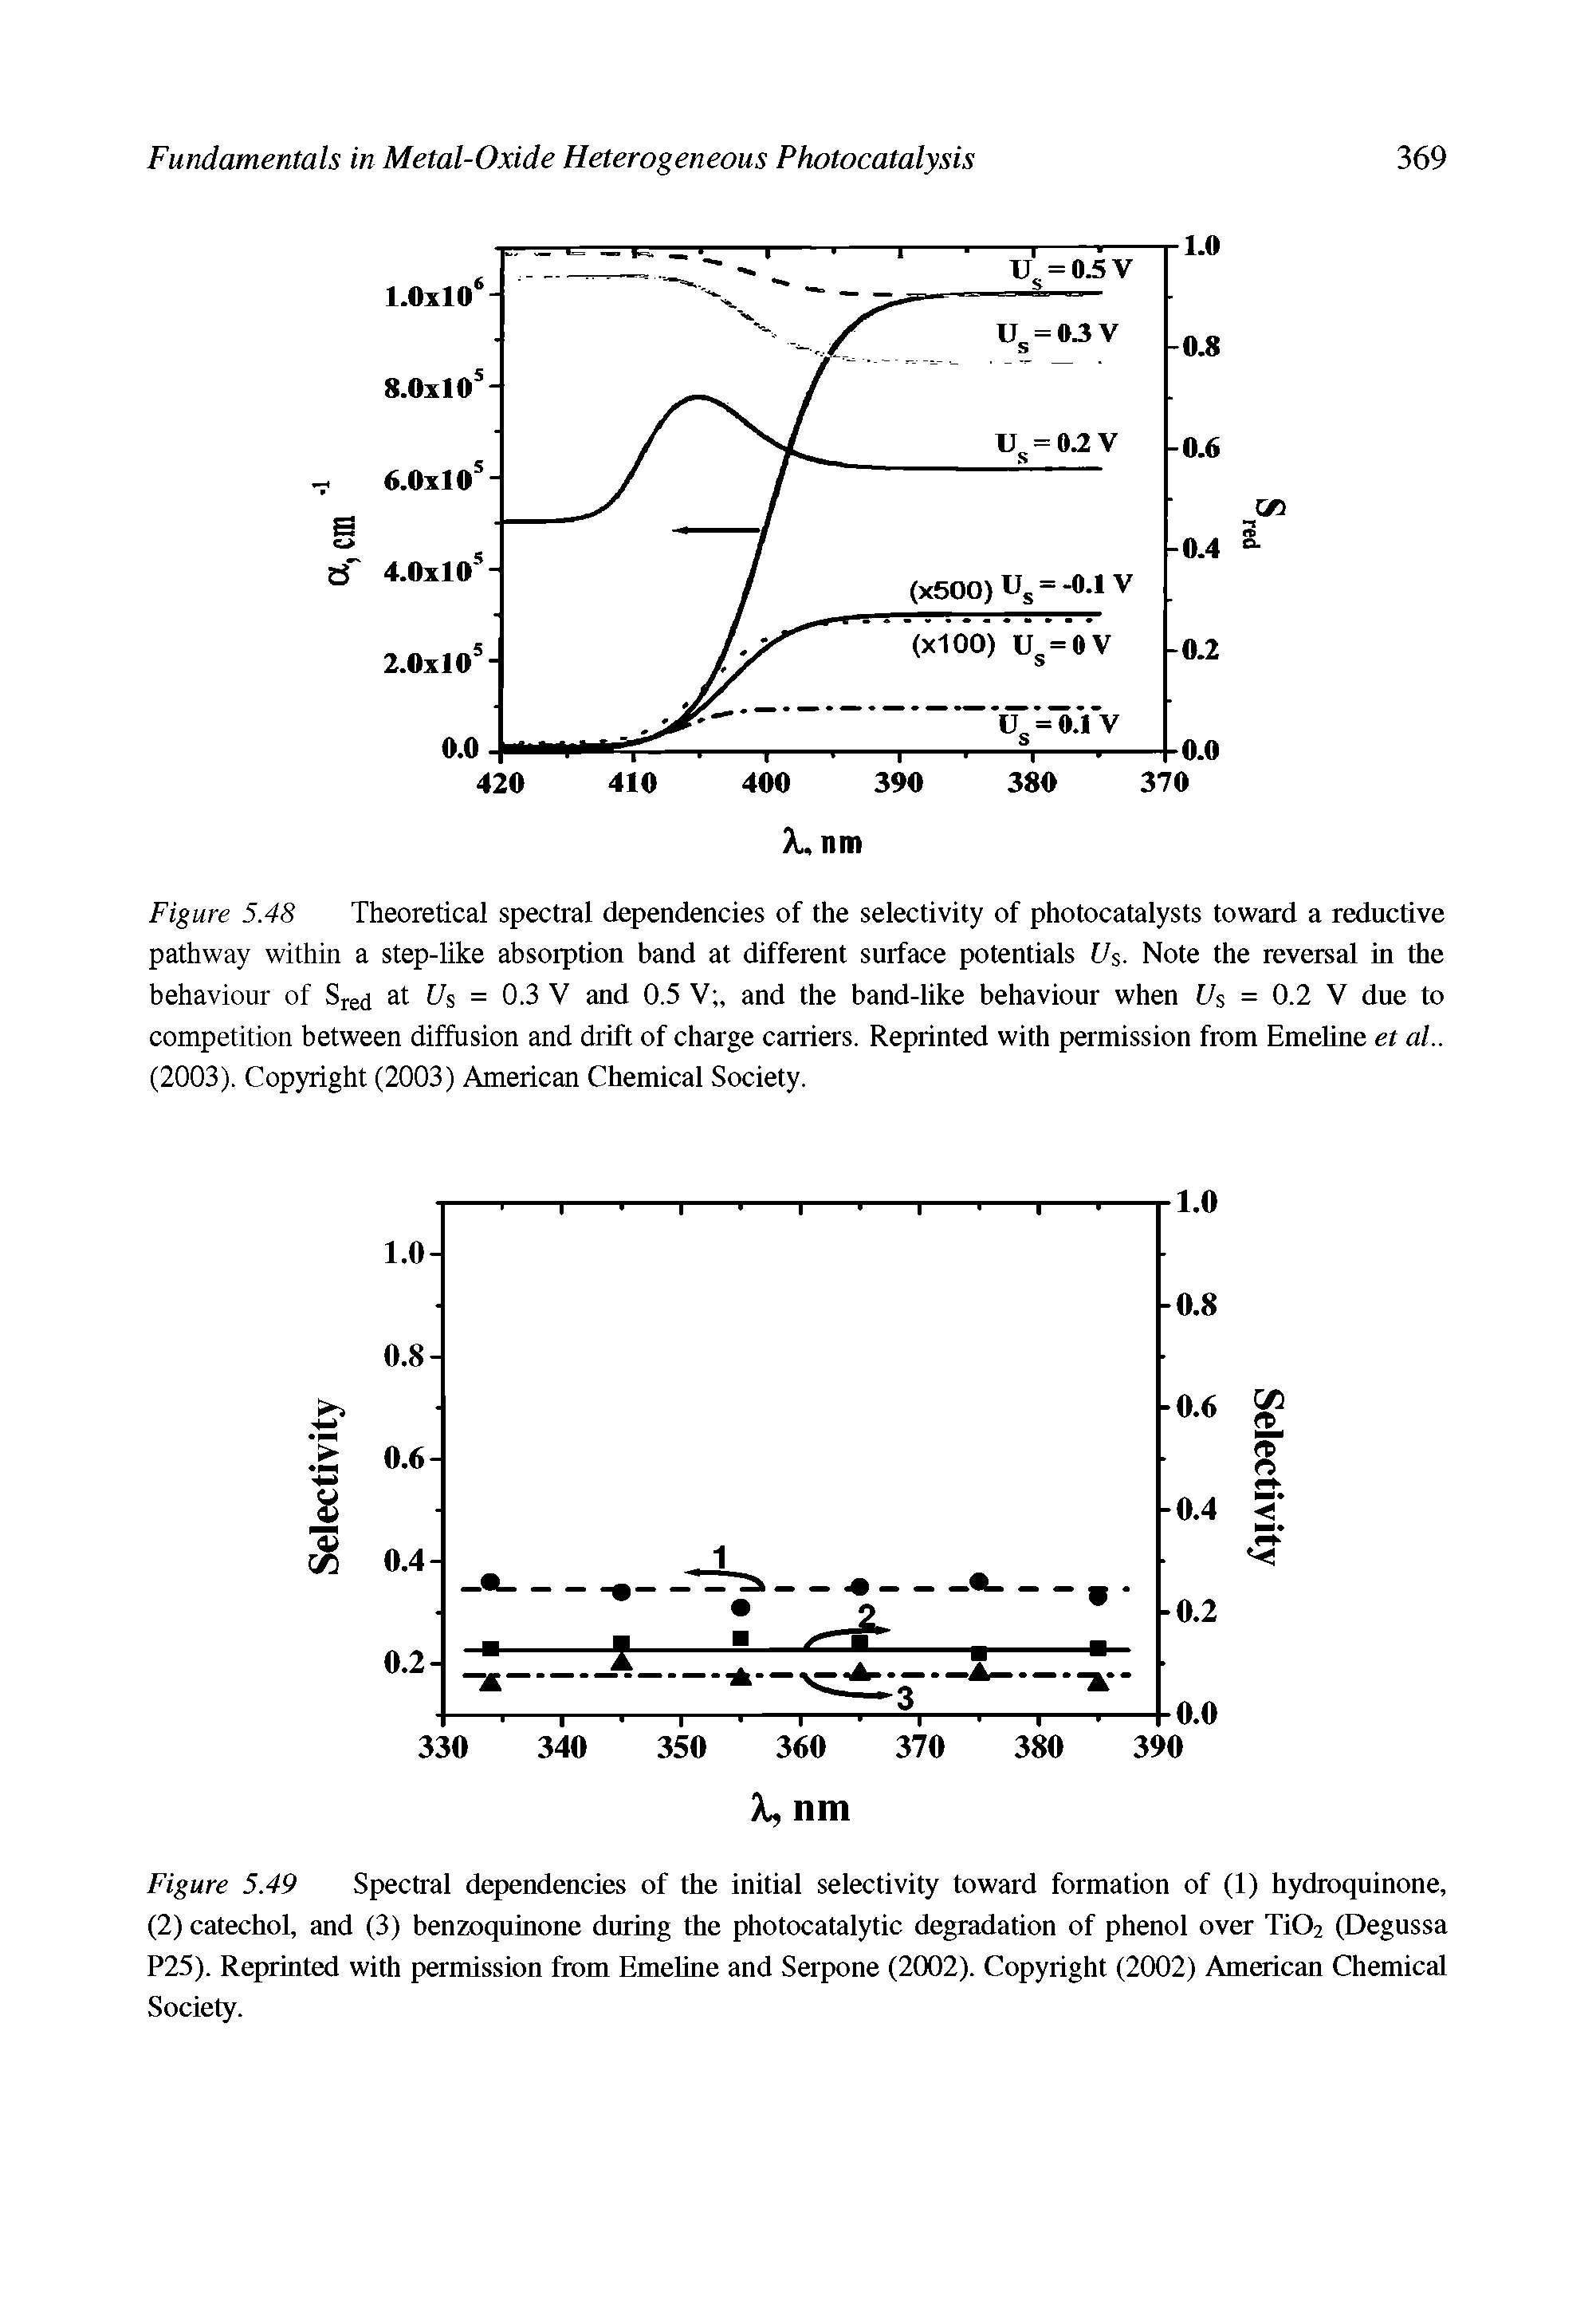 Figure 5.48 Theoretical spectral dependencies of the selectivity of photocatalysts toward a reductive pathway within a step-like absorption band at different surface potentials Us. Note the reversal in the behaviour of Sj-ed at Us = 0.3 V and 0.5 V , and the band-like behaviour when U = 0.2 V due to competition between diffusion and drift of charge carriers. Reprinted with permission from EmeUne et al.. (2003). Copyright (2003) American Chemical Society.